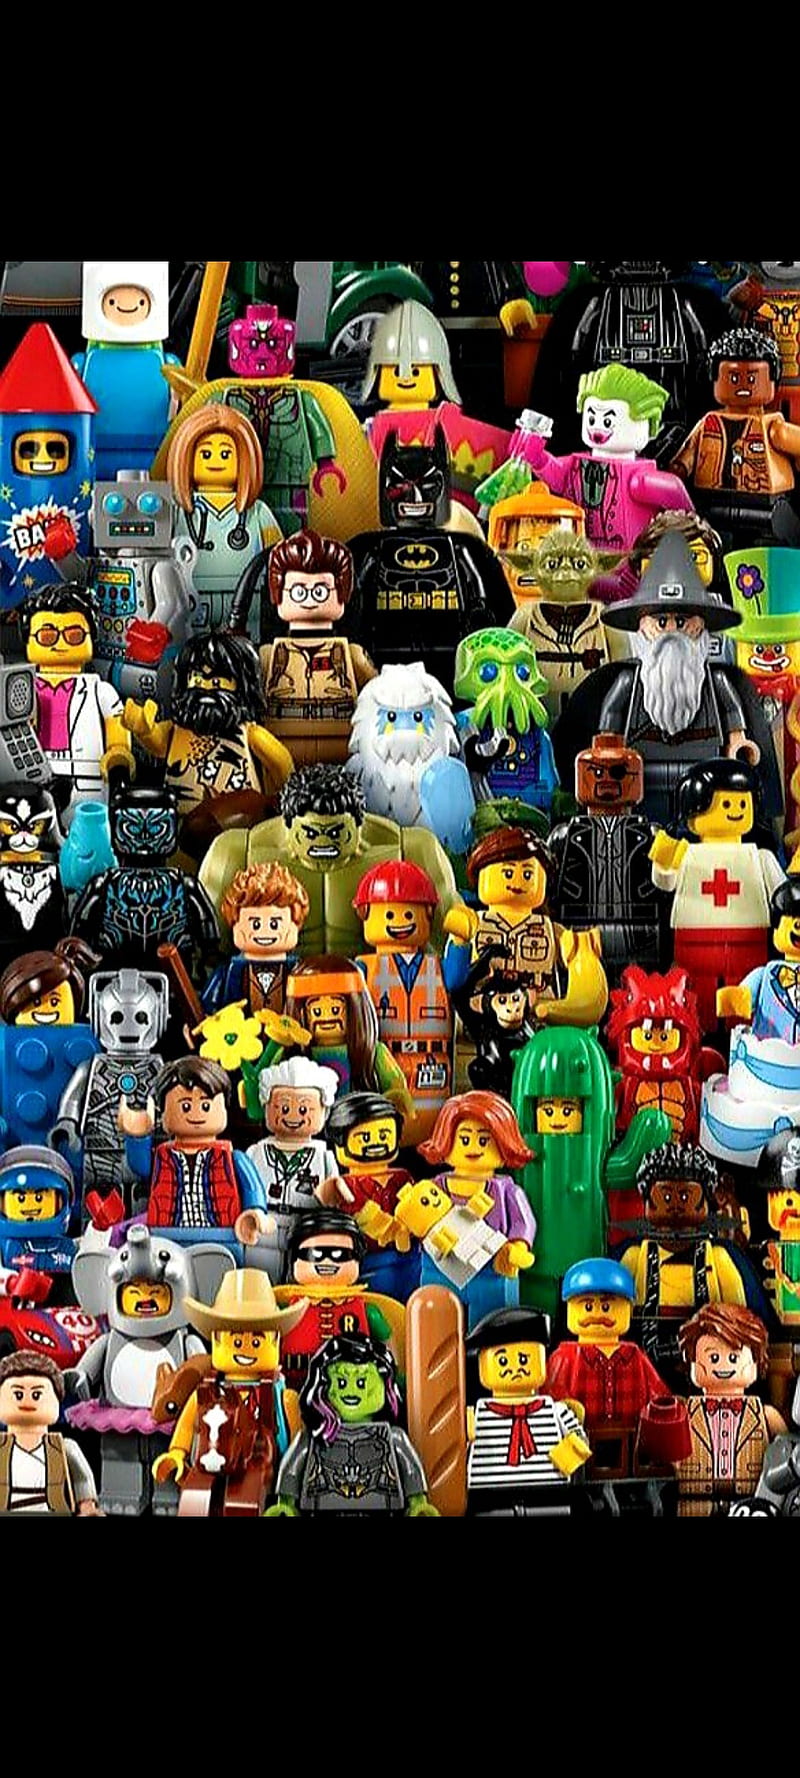 Lego Minifigures, collectables, figurines, fun, game, games, legos, minifigurines, toys, HD phone wallpaper